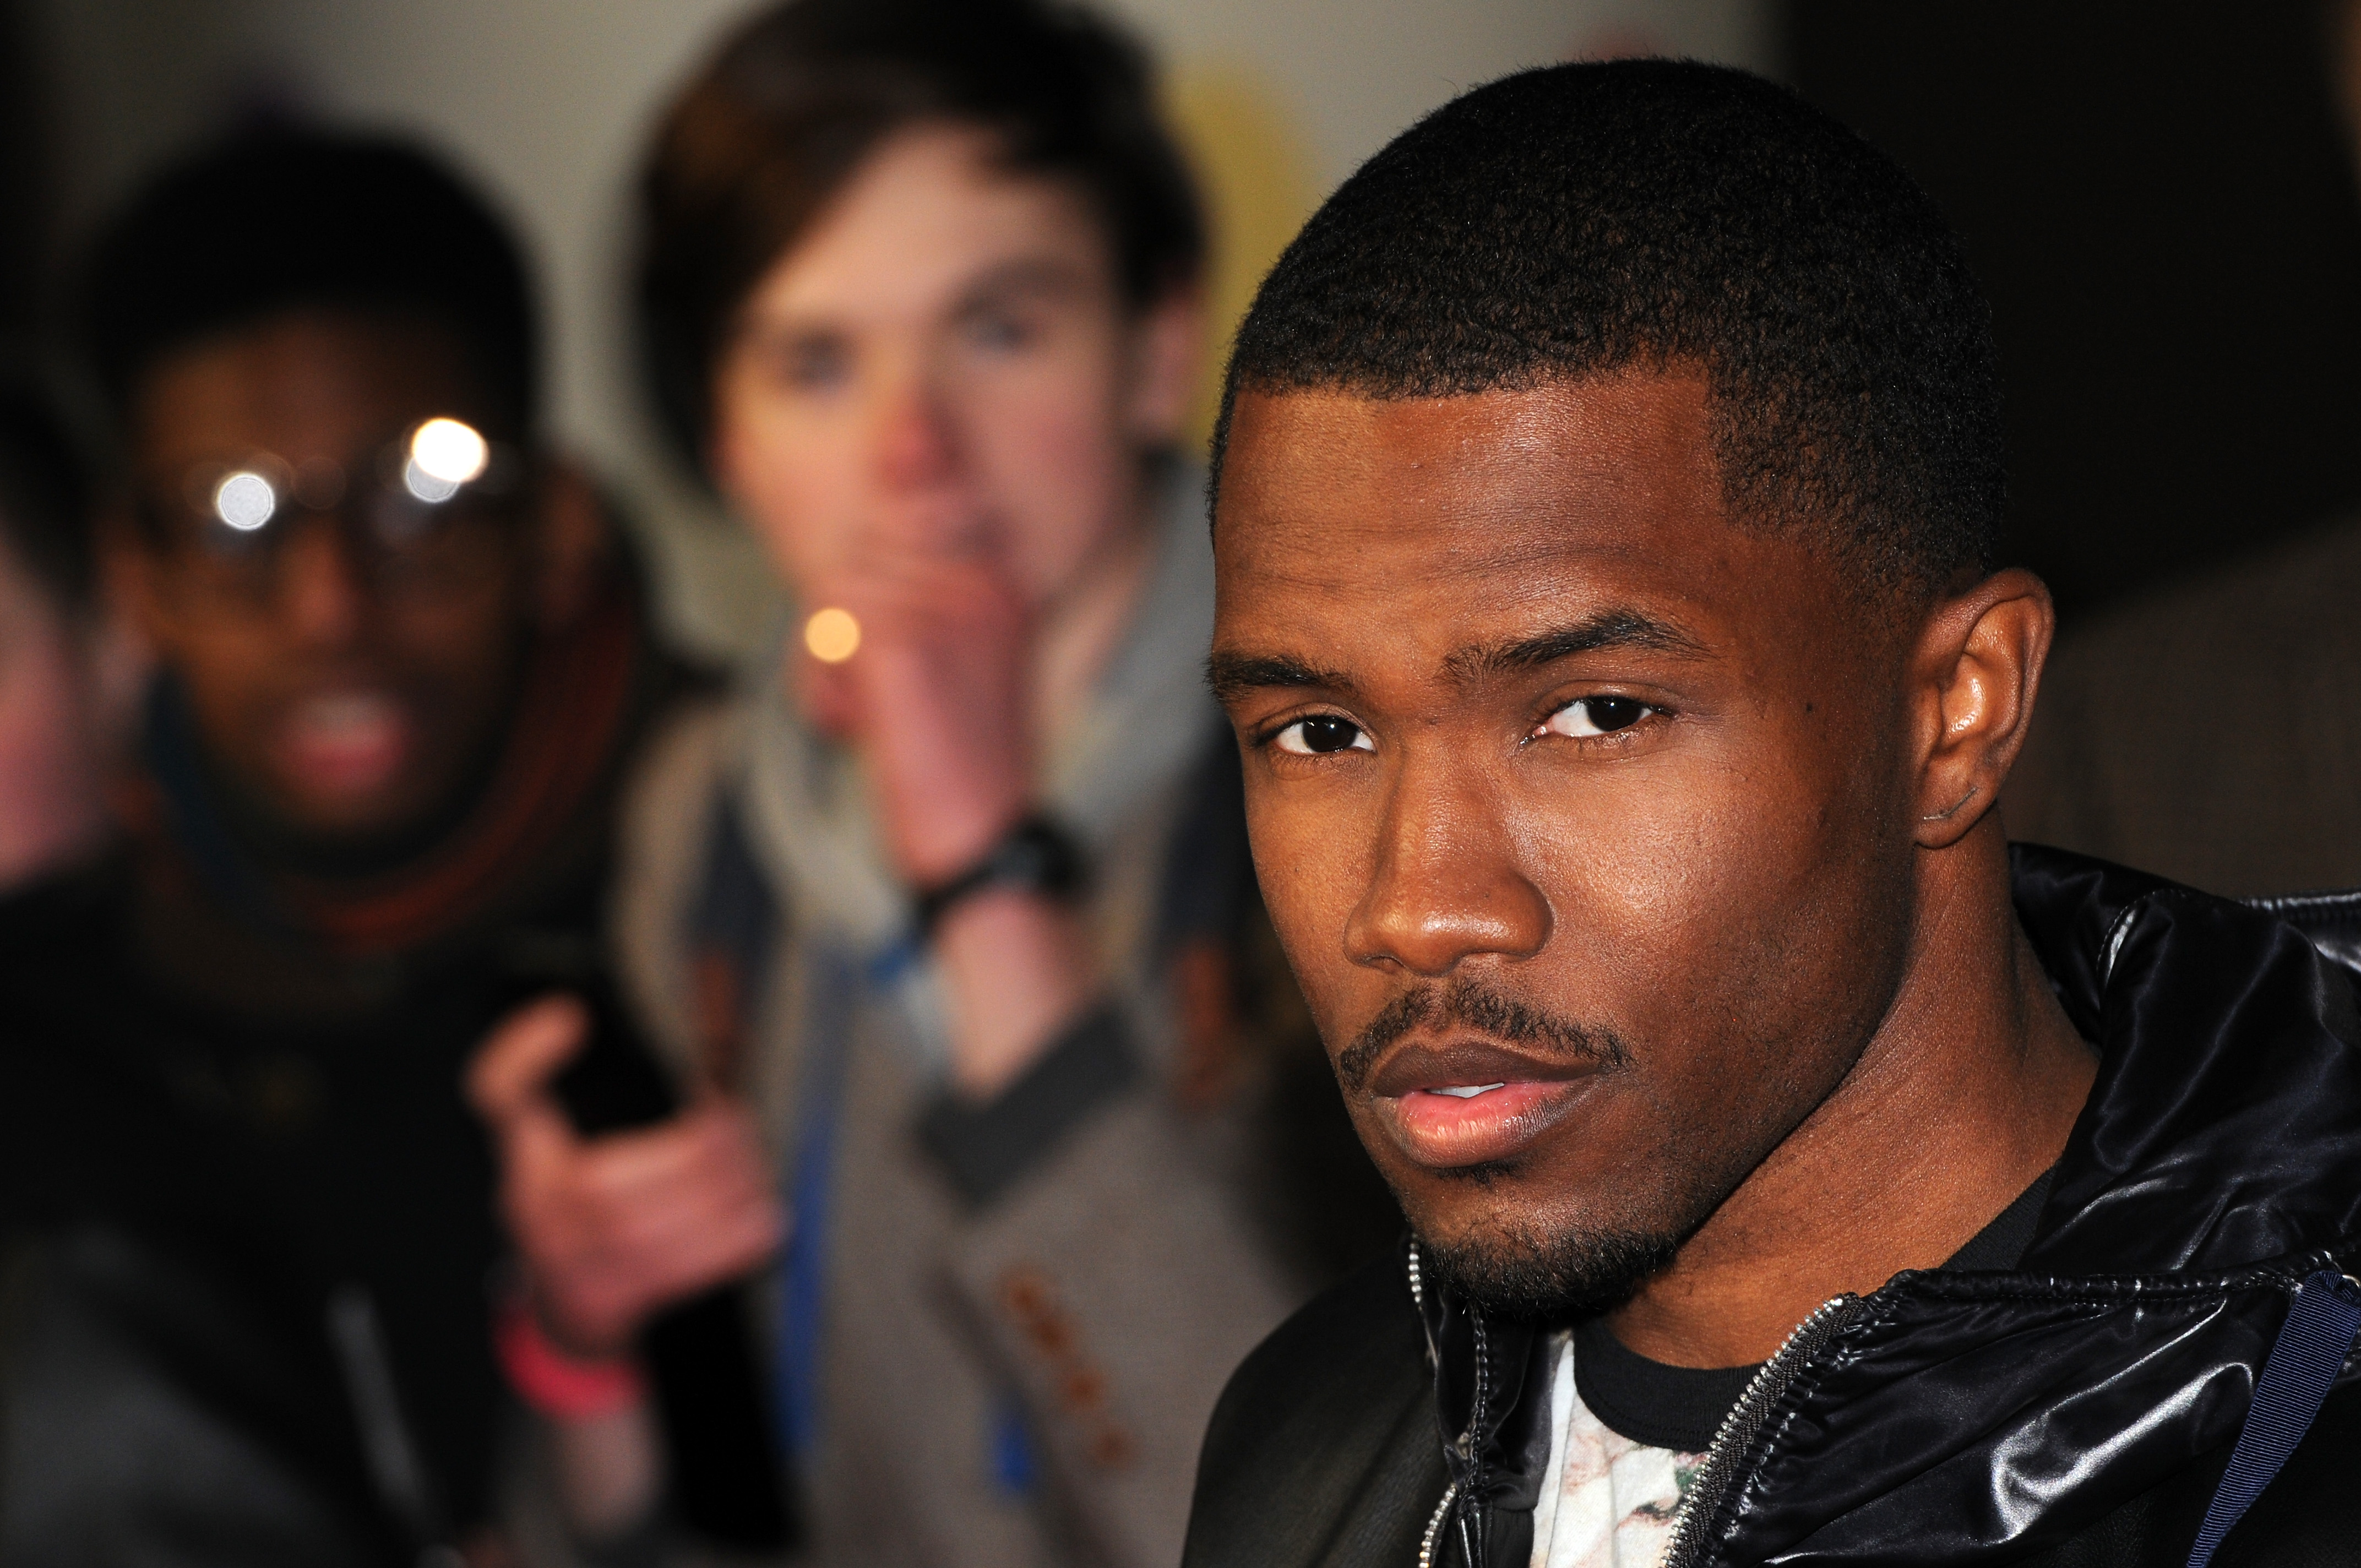 Frank Ocean Gets Interviewed By Billy Porter, John Waters, Nile Rogers & More For “Dazed”